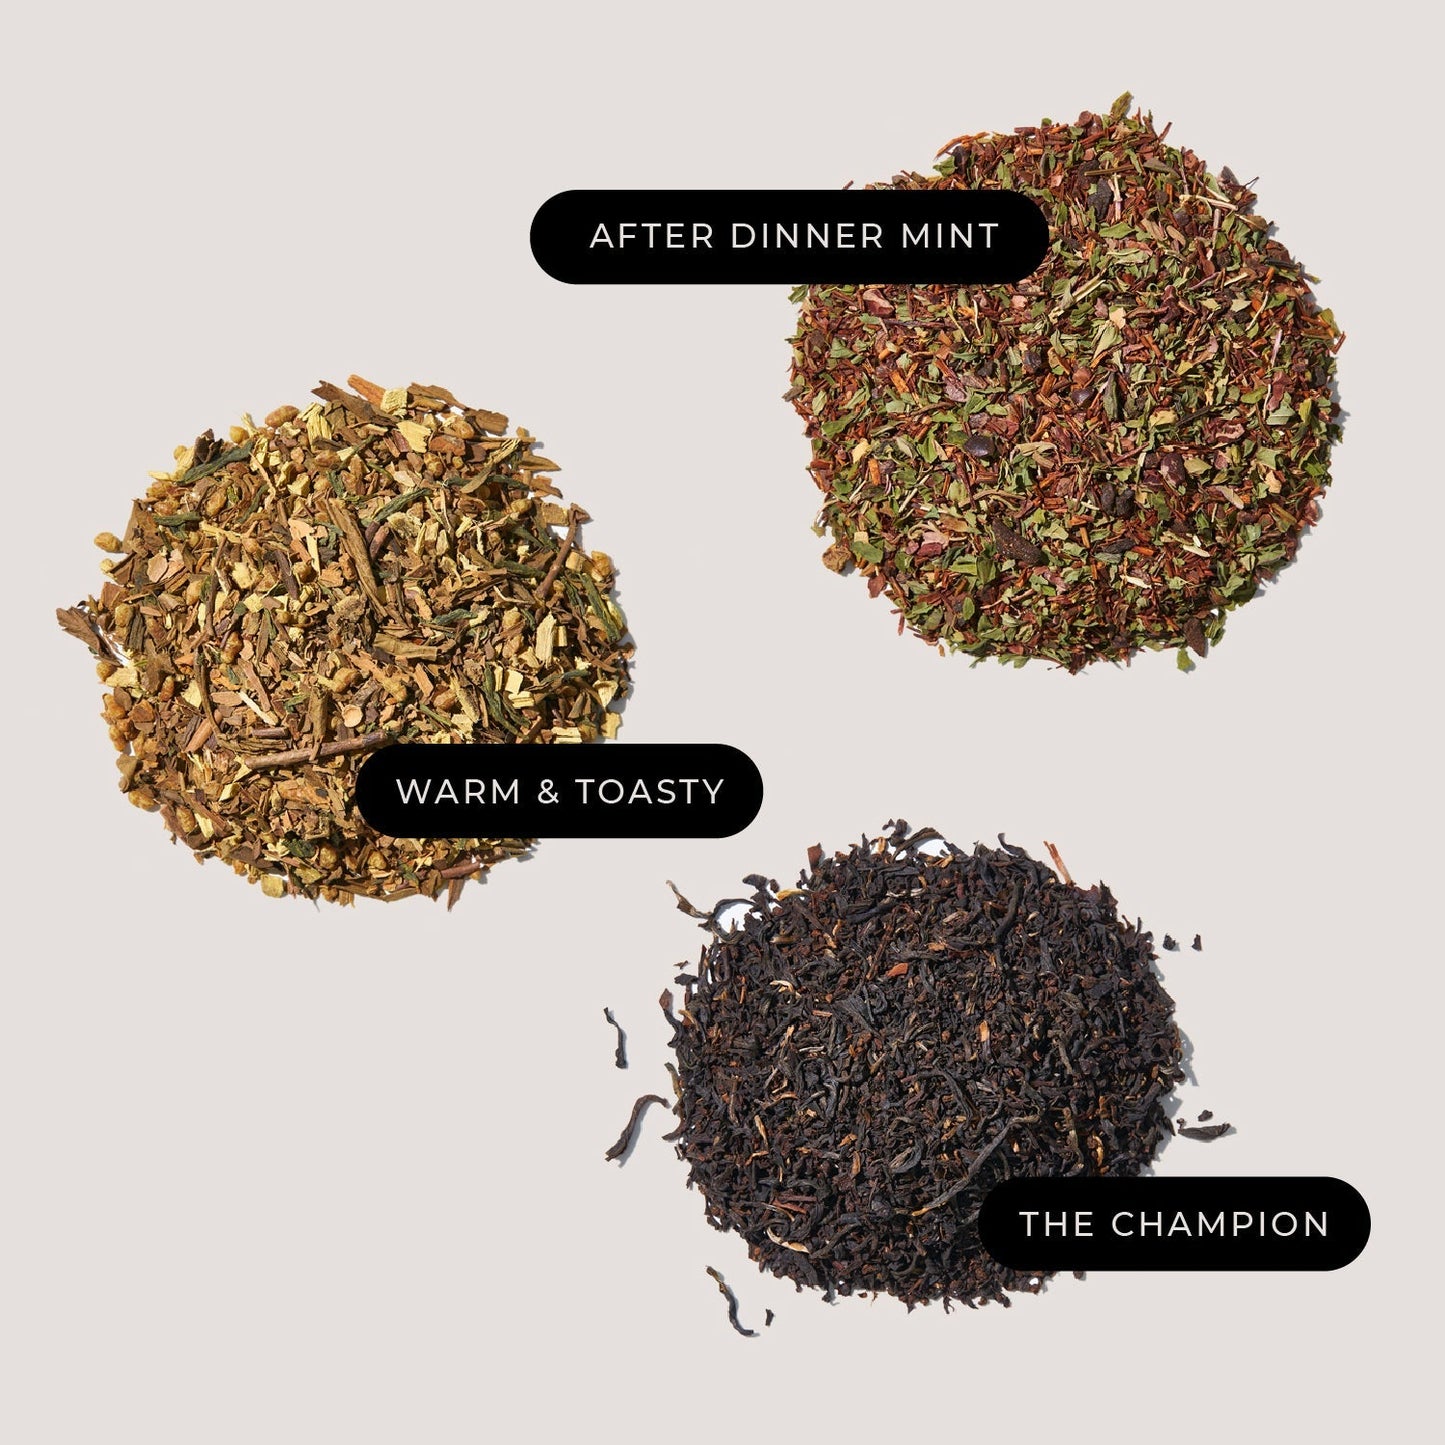 The Must-Have by Firebelly Tea